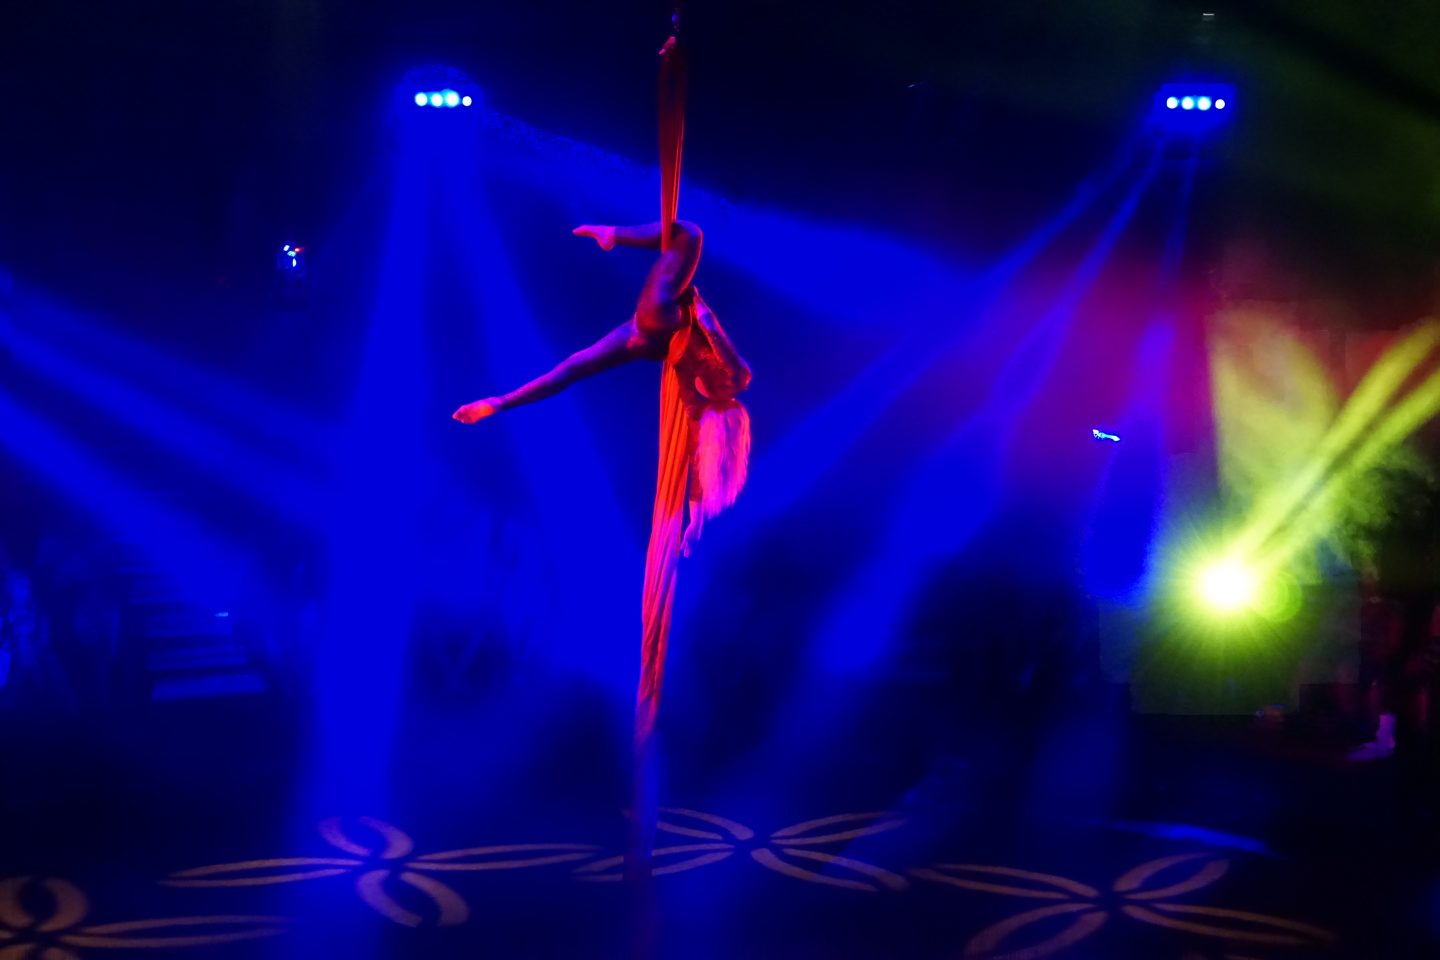 Acrobat in the Great Yarmouth hippodrome circus hanging from the ceiling wearing pink with blue lights around